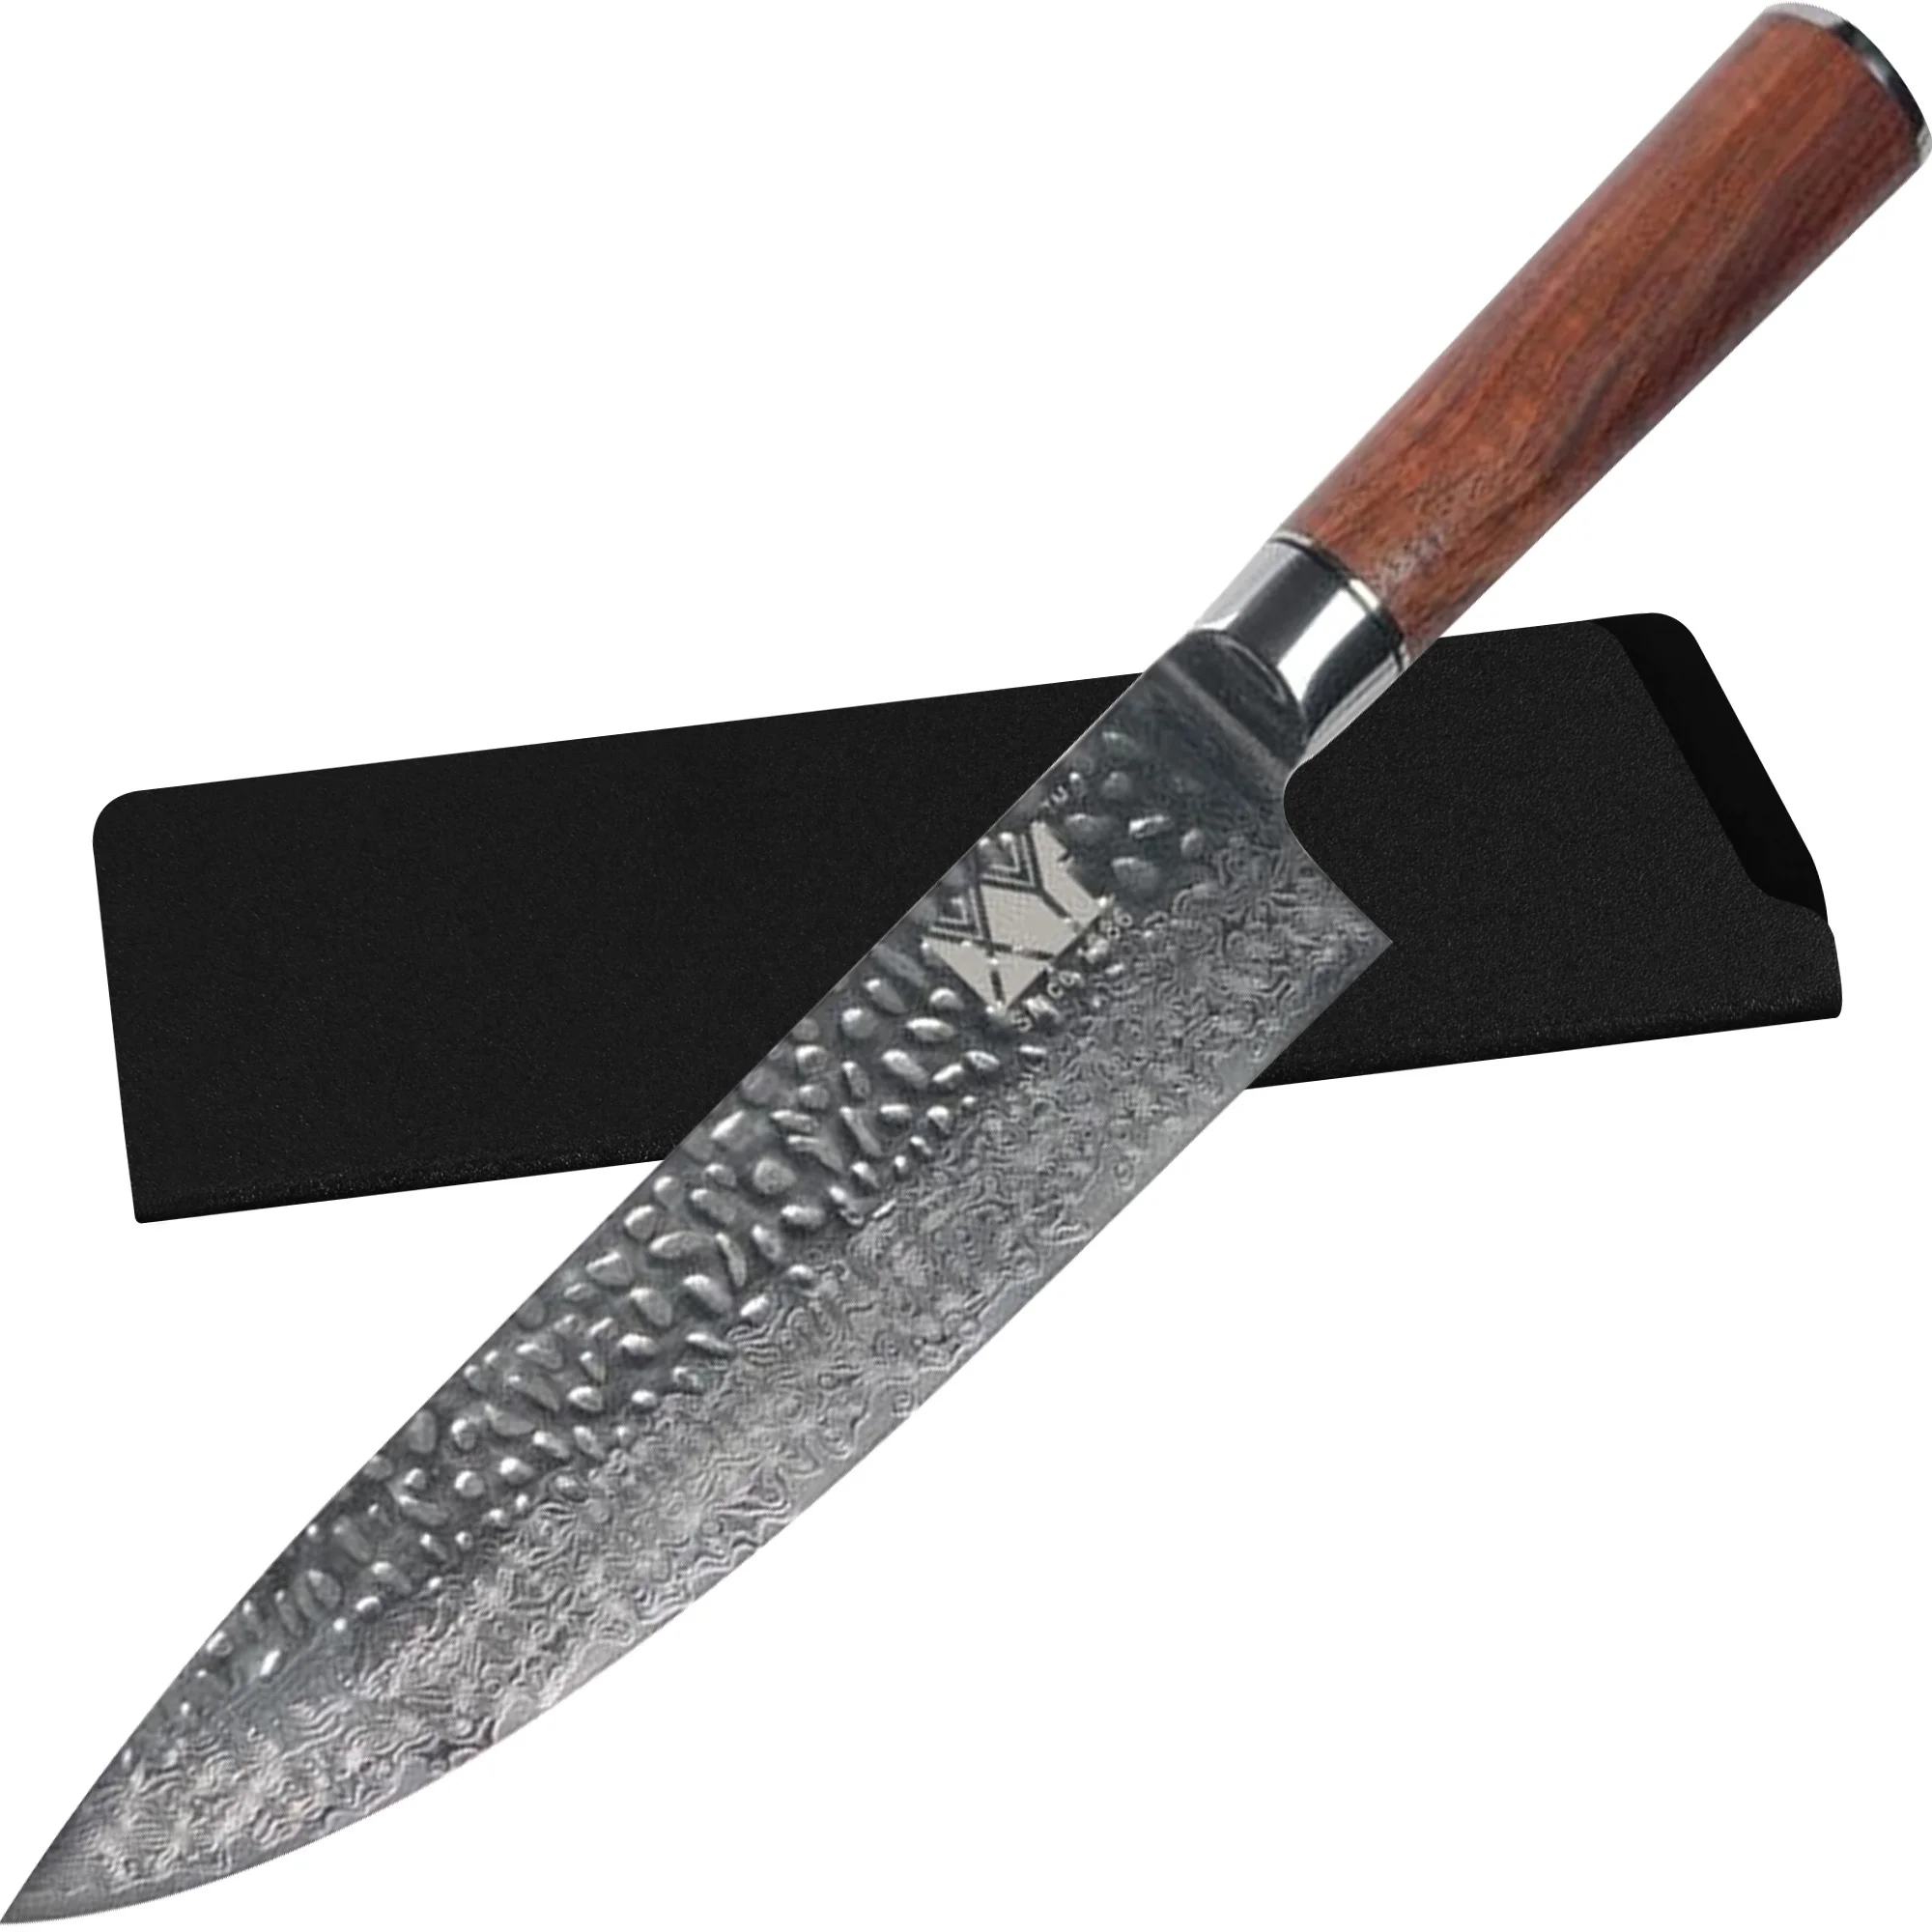 Zemen 8 Inch Damascus Japanese Chef Knife Slicing Kitchen Knife Rosewood Handle Damascus Steel Vegetable Cook Knives With Sheath